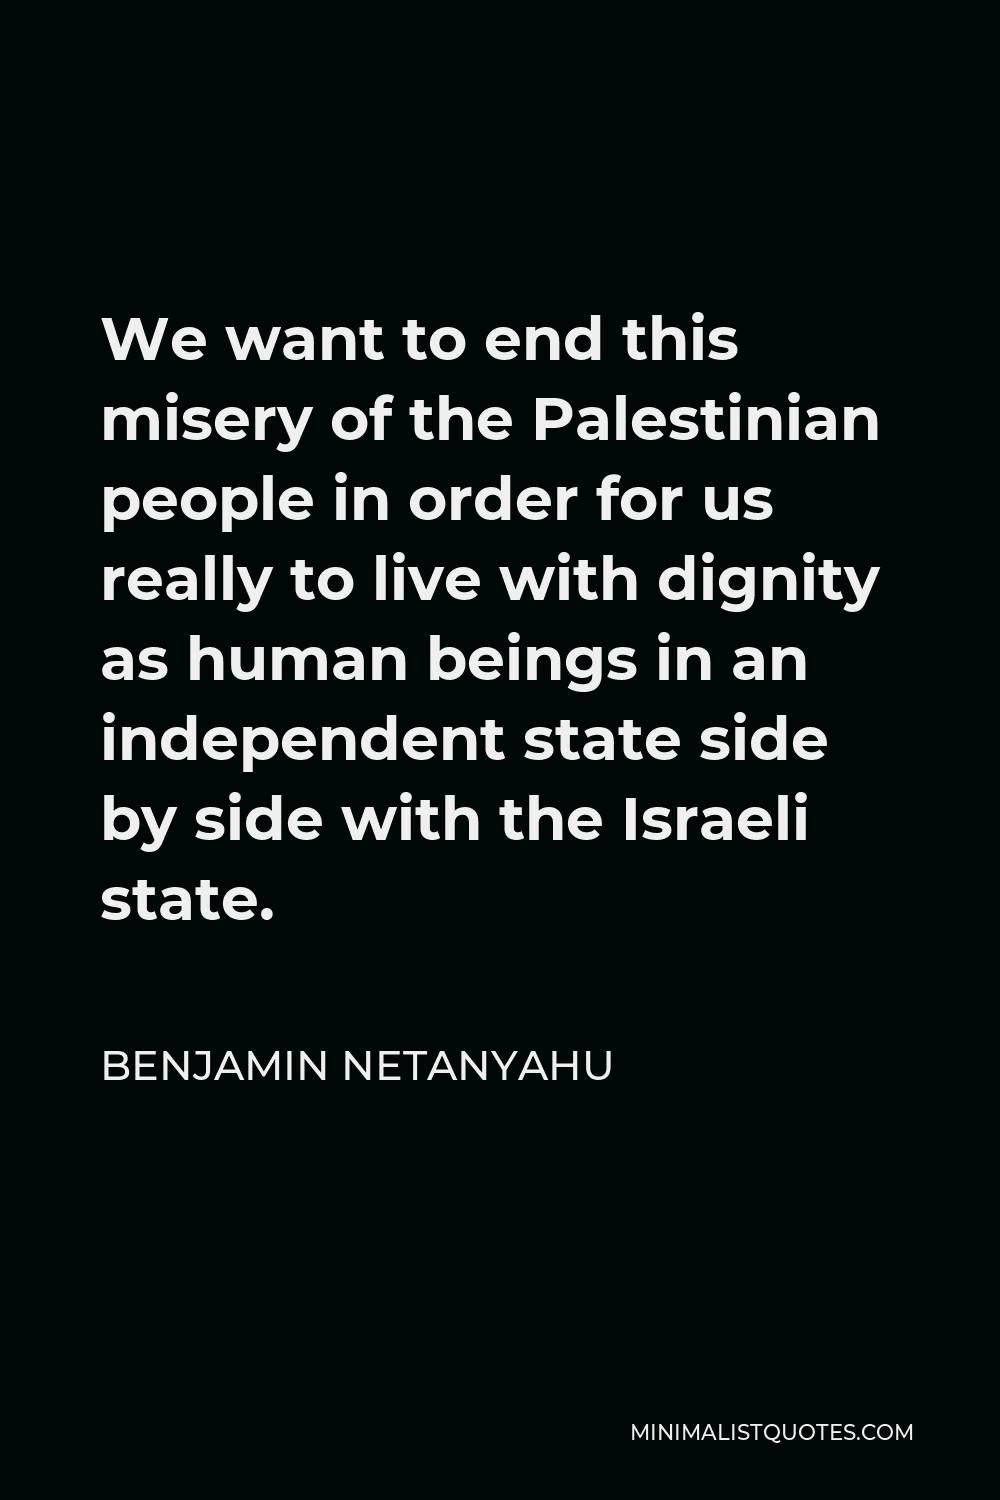 Benjamin Netanyahu Quote - We want to end this misery of the Palestinian people in order for us really to live with dignity as human beings in an independent state side by side with the Israeli state.